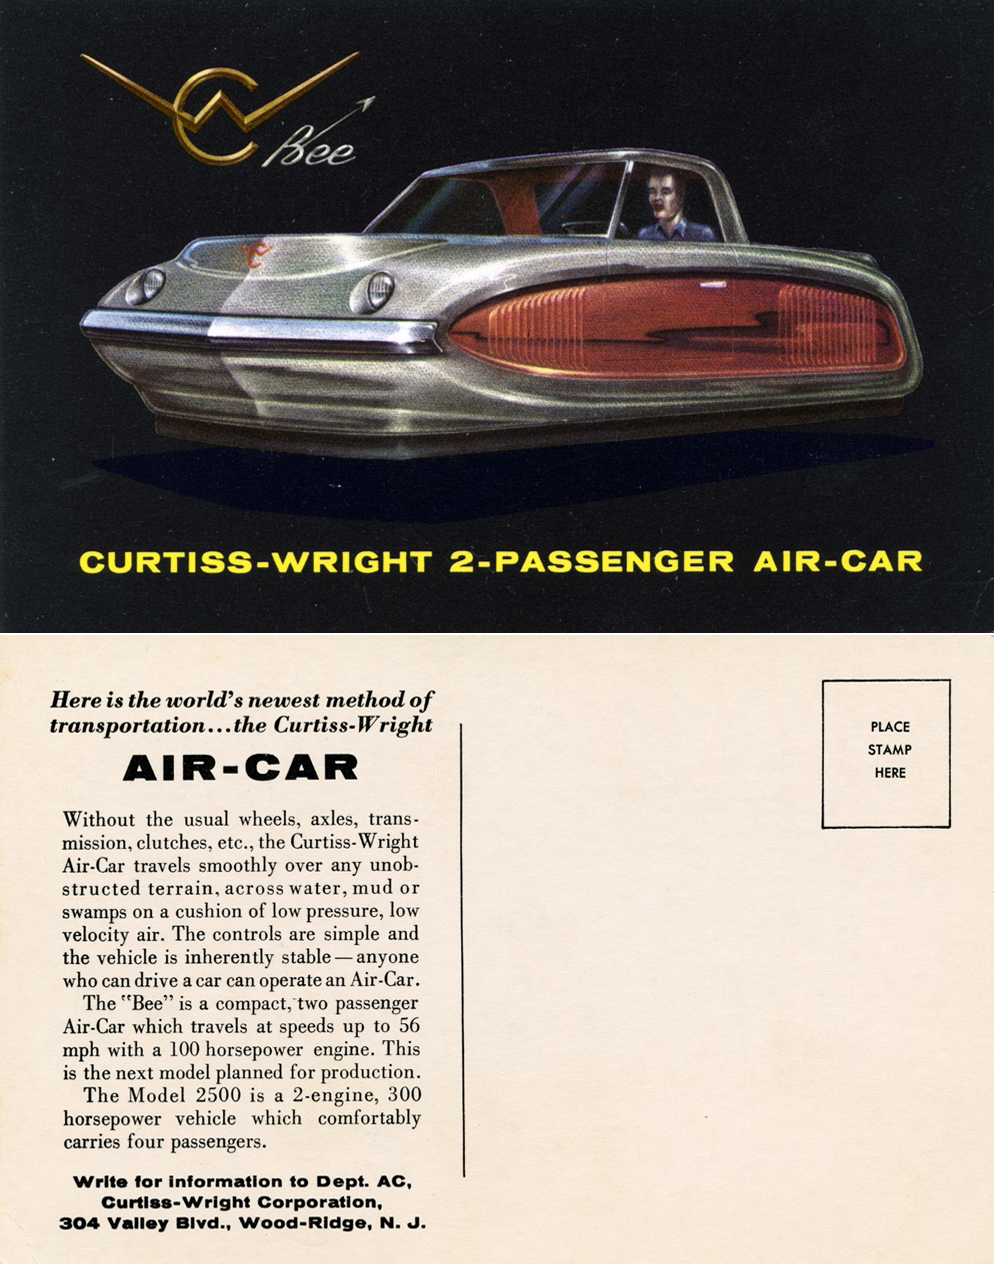 Curtiss-Wright Bee, Two Passenger Air-Car (1959) - Advertising Postcard